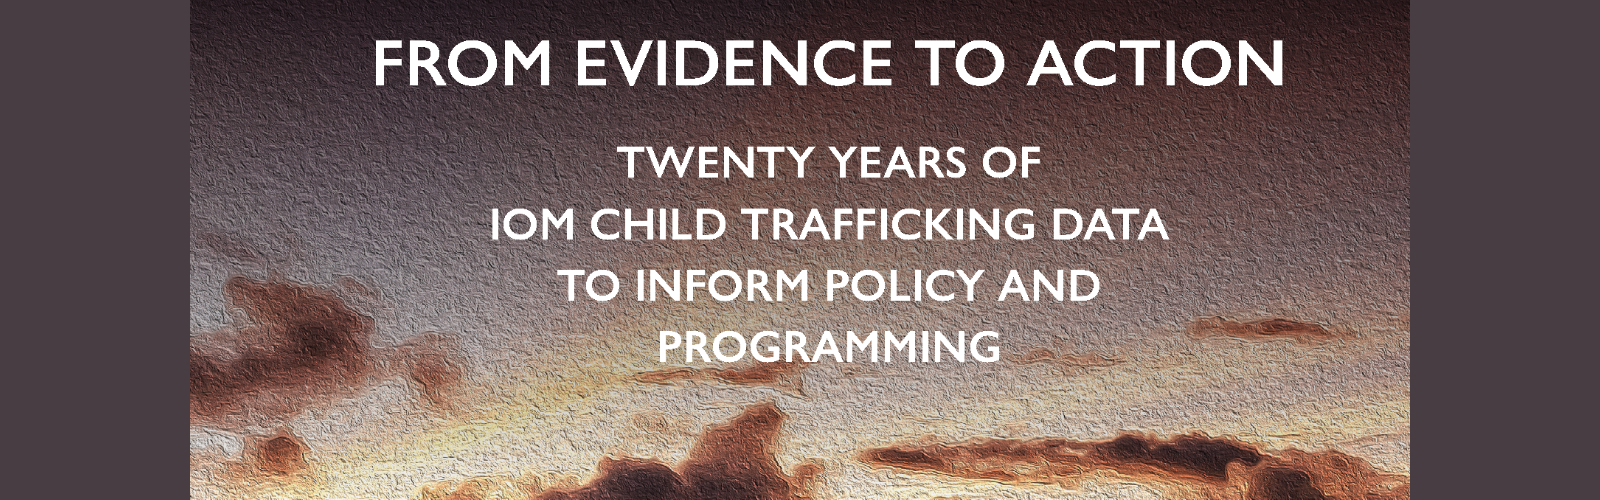 Child Trafficking Report: From Evidence to Action